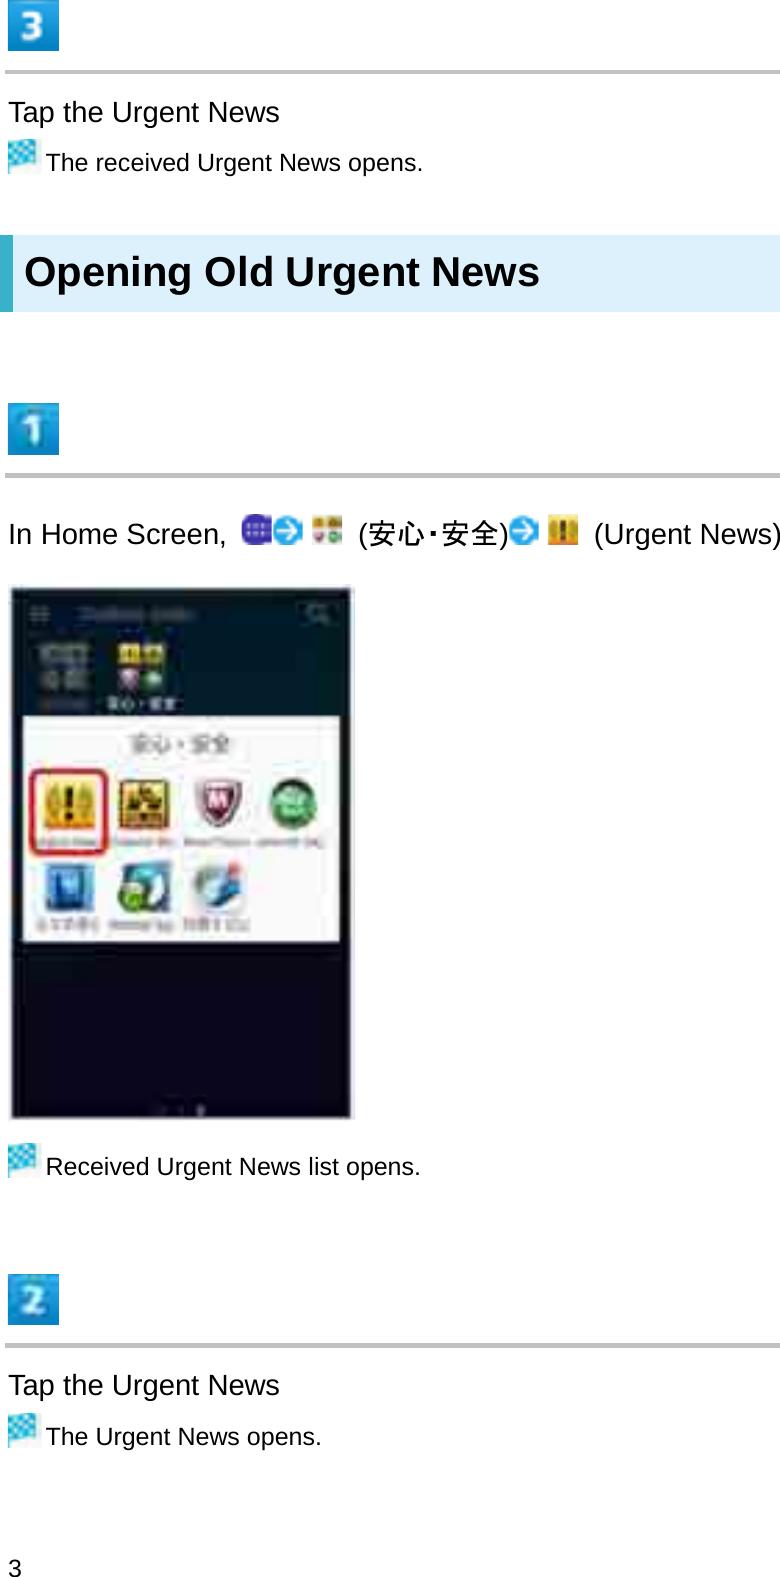 Tap the Urgent NewsThe received Urgent News opens.Opening Old Urgent NewsIn Home Screen,  (Ᏻᚰ䞉Ᏻ඲)(Urgent News)Received Urgent News list opens.Tap the Urgent NewsThe Urgent News opens.3